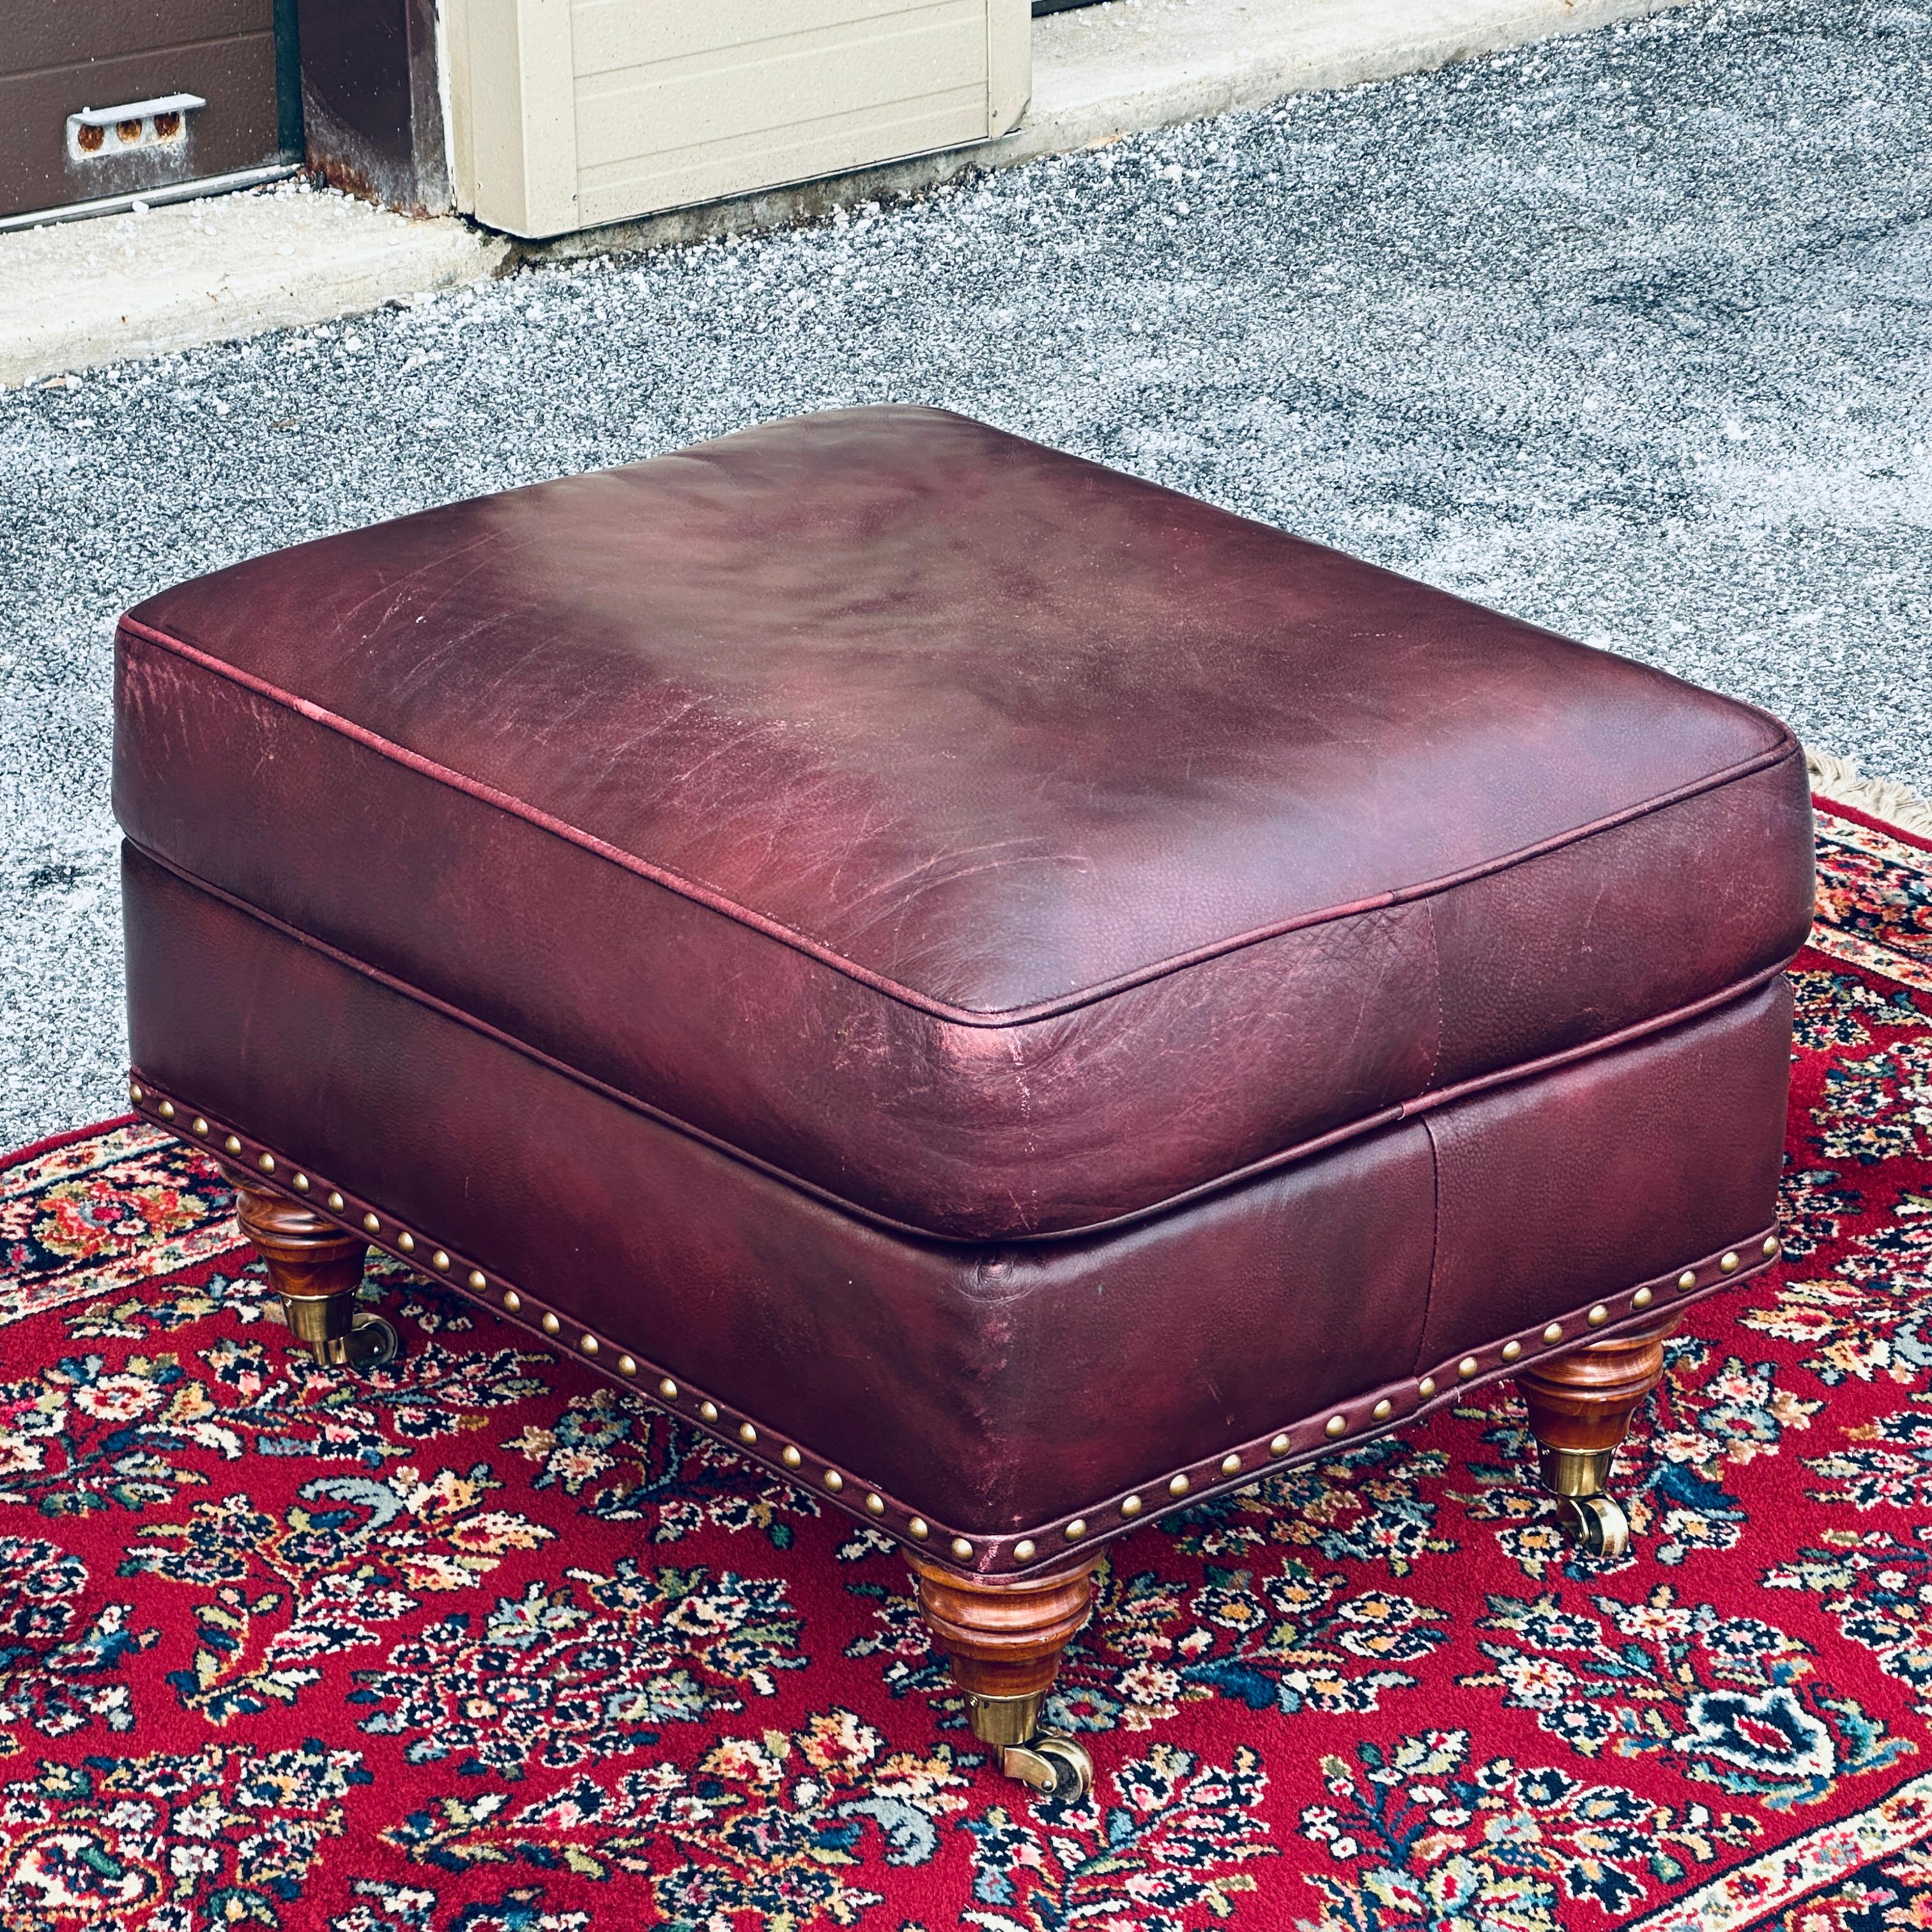 British Colonial Hancock & Moore English Regency Leather Nailhead Ottoman on Brass Casters